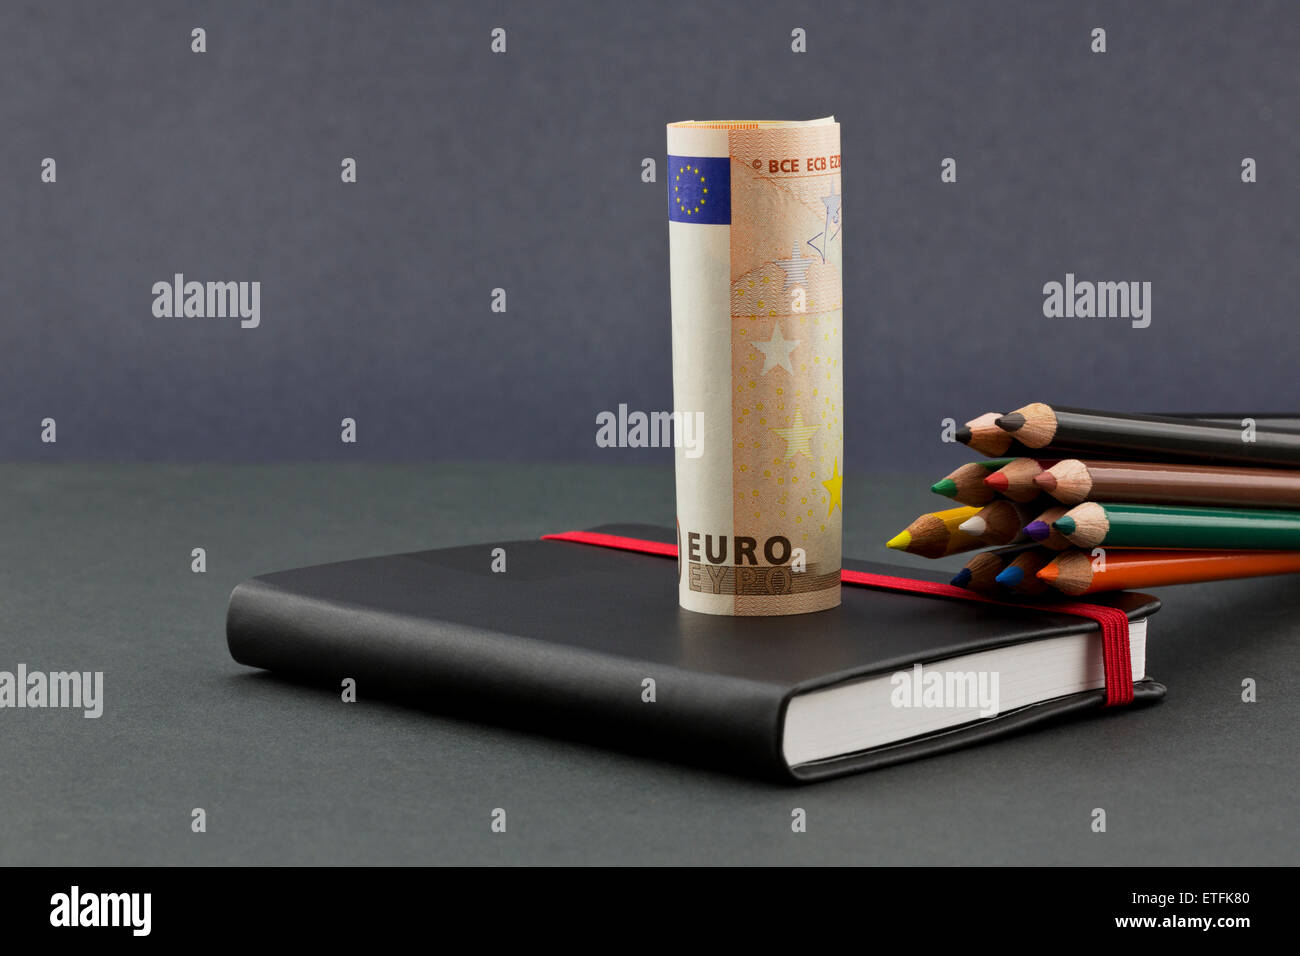 Business opportunities and challenges for the euro reflected in multiple colors of pencils, Euro currency, and black journal Stock Photo